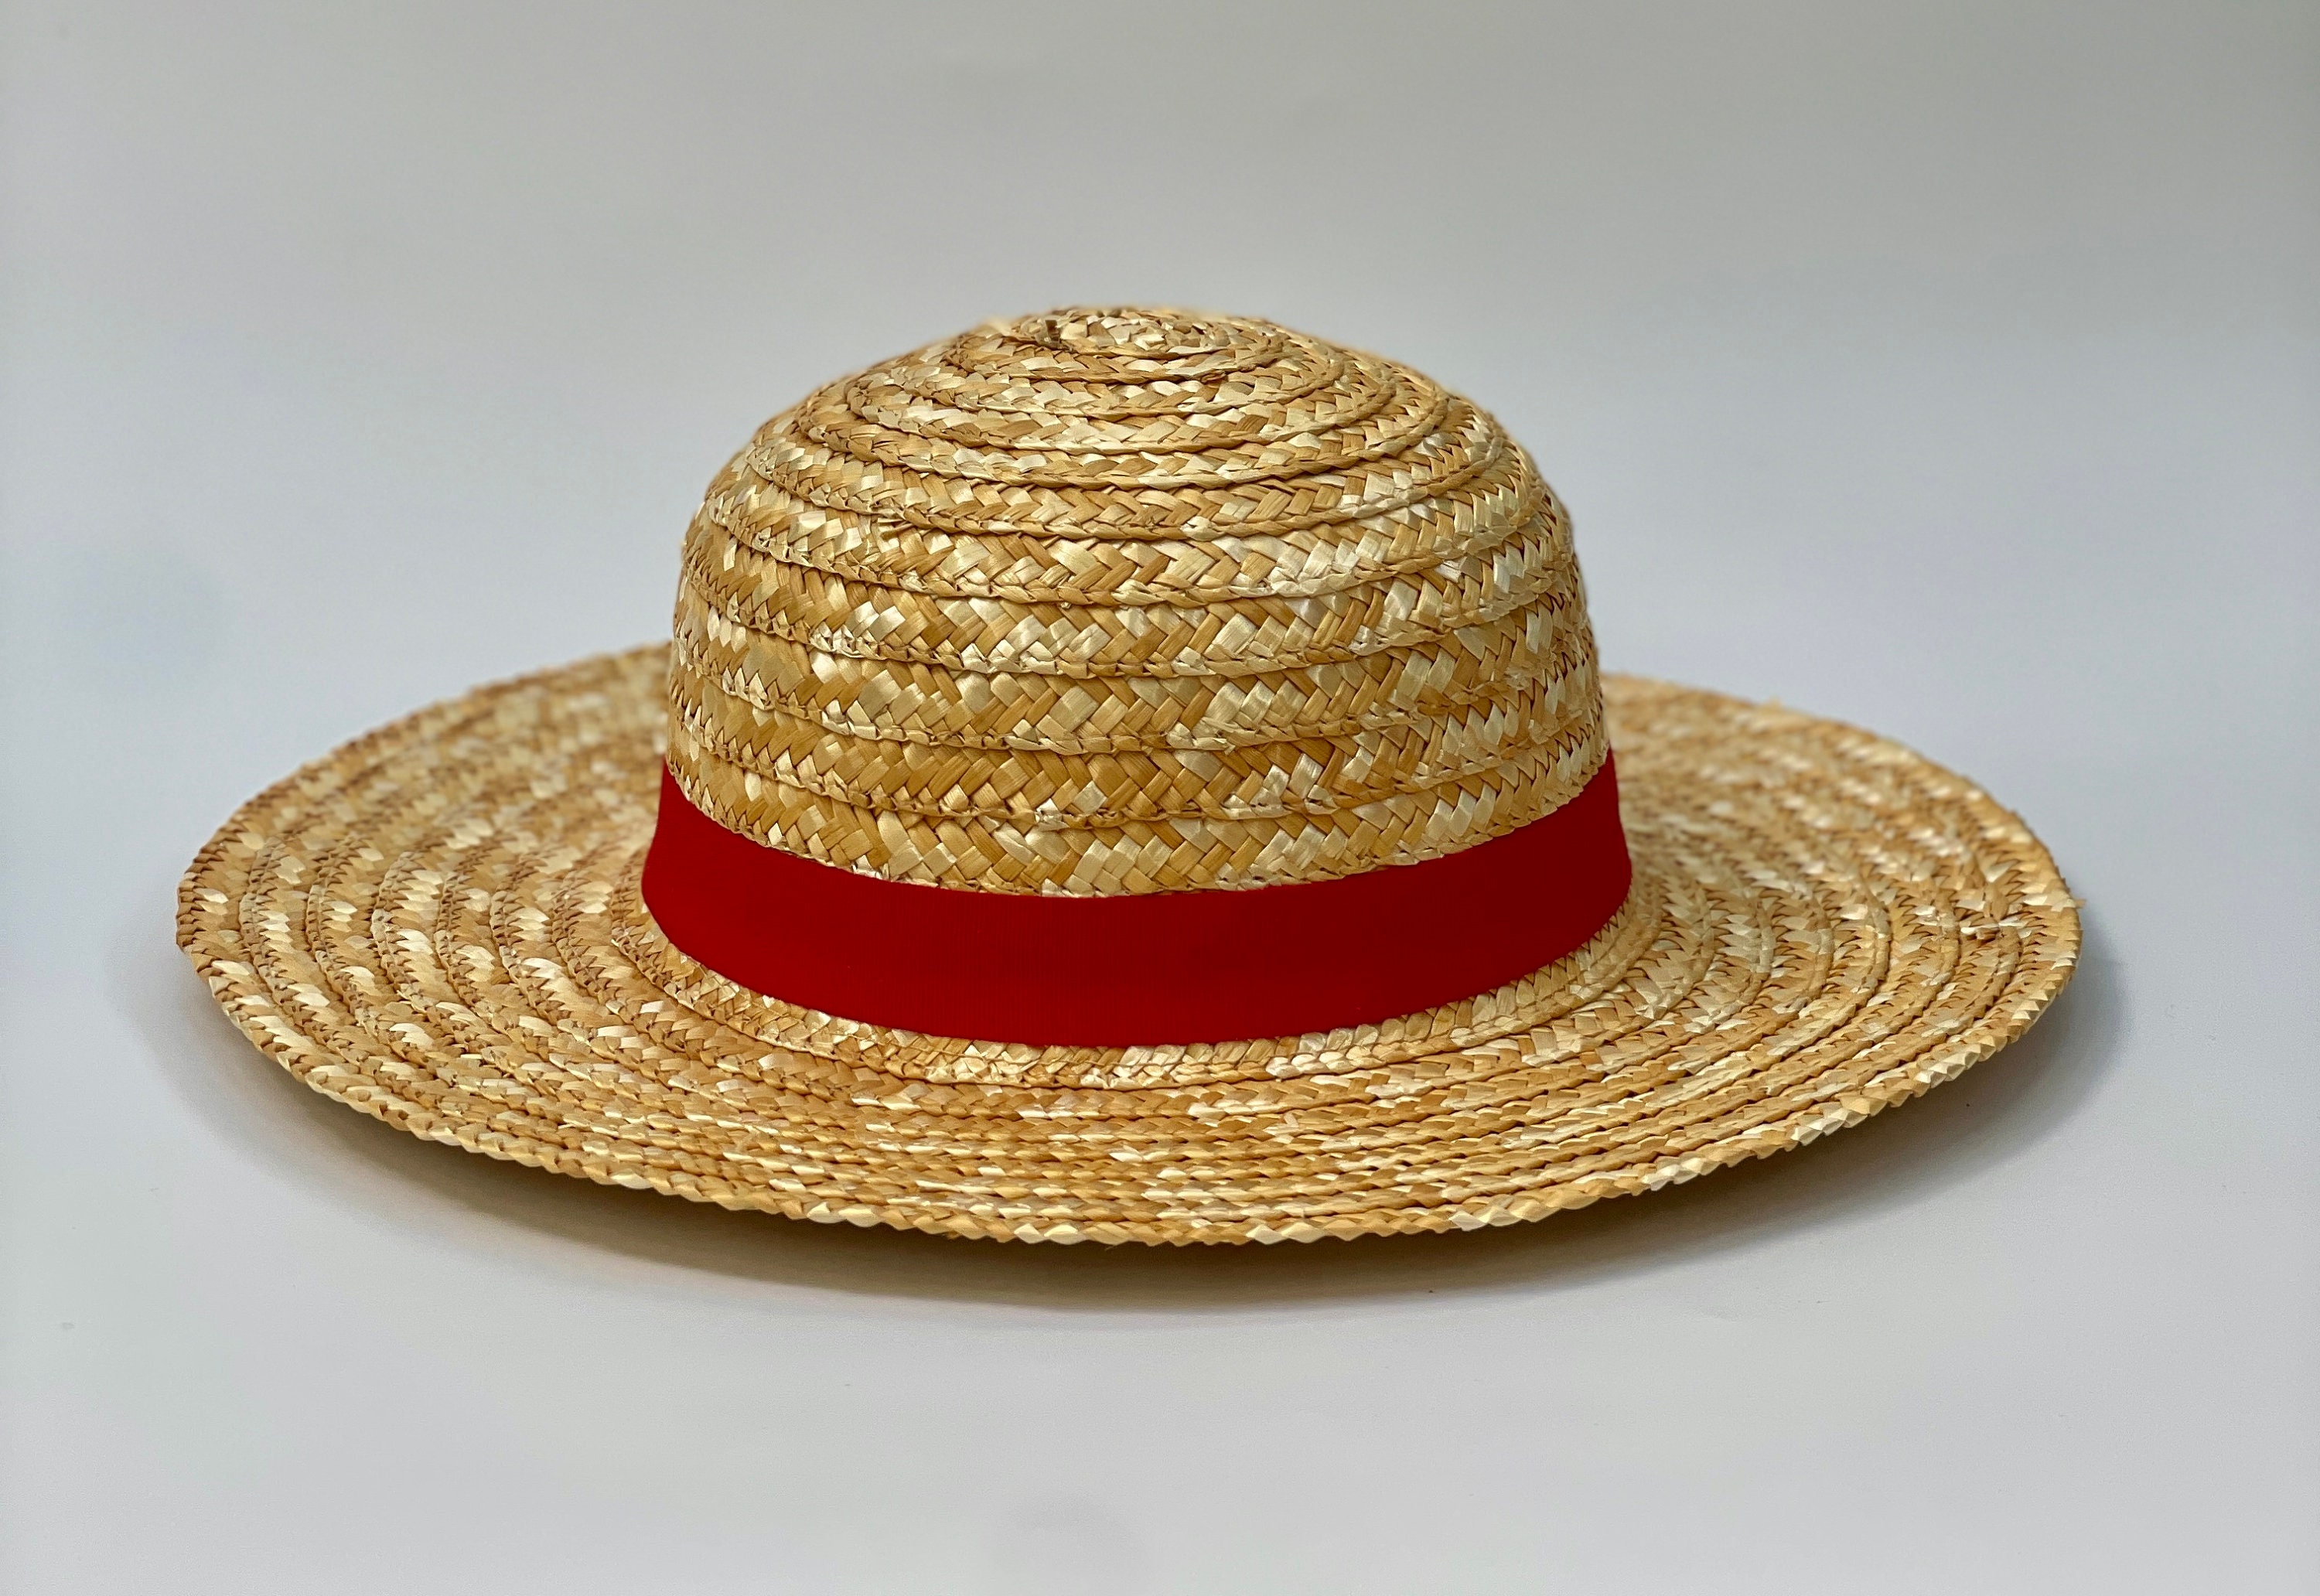 Buy Straw Hat Online In India -  India